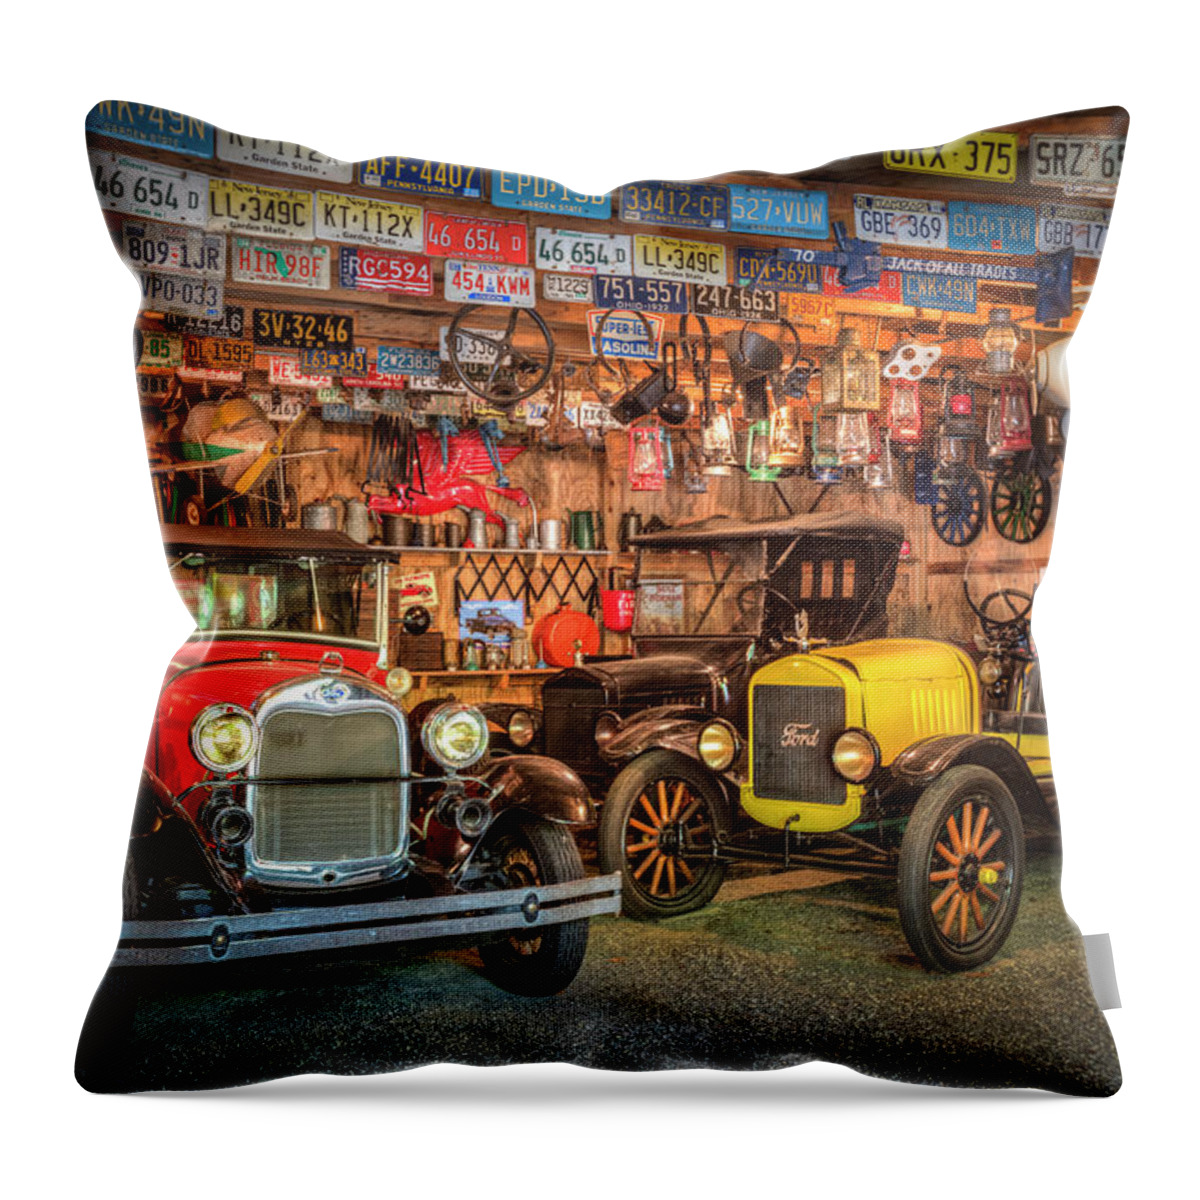 Appalachia Throw Pillow featuring the photograph Vintage Fords Collectibles by Debra and Dave Vanderlaan